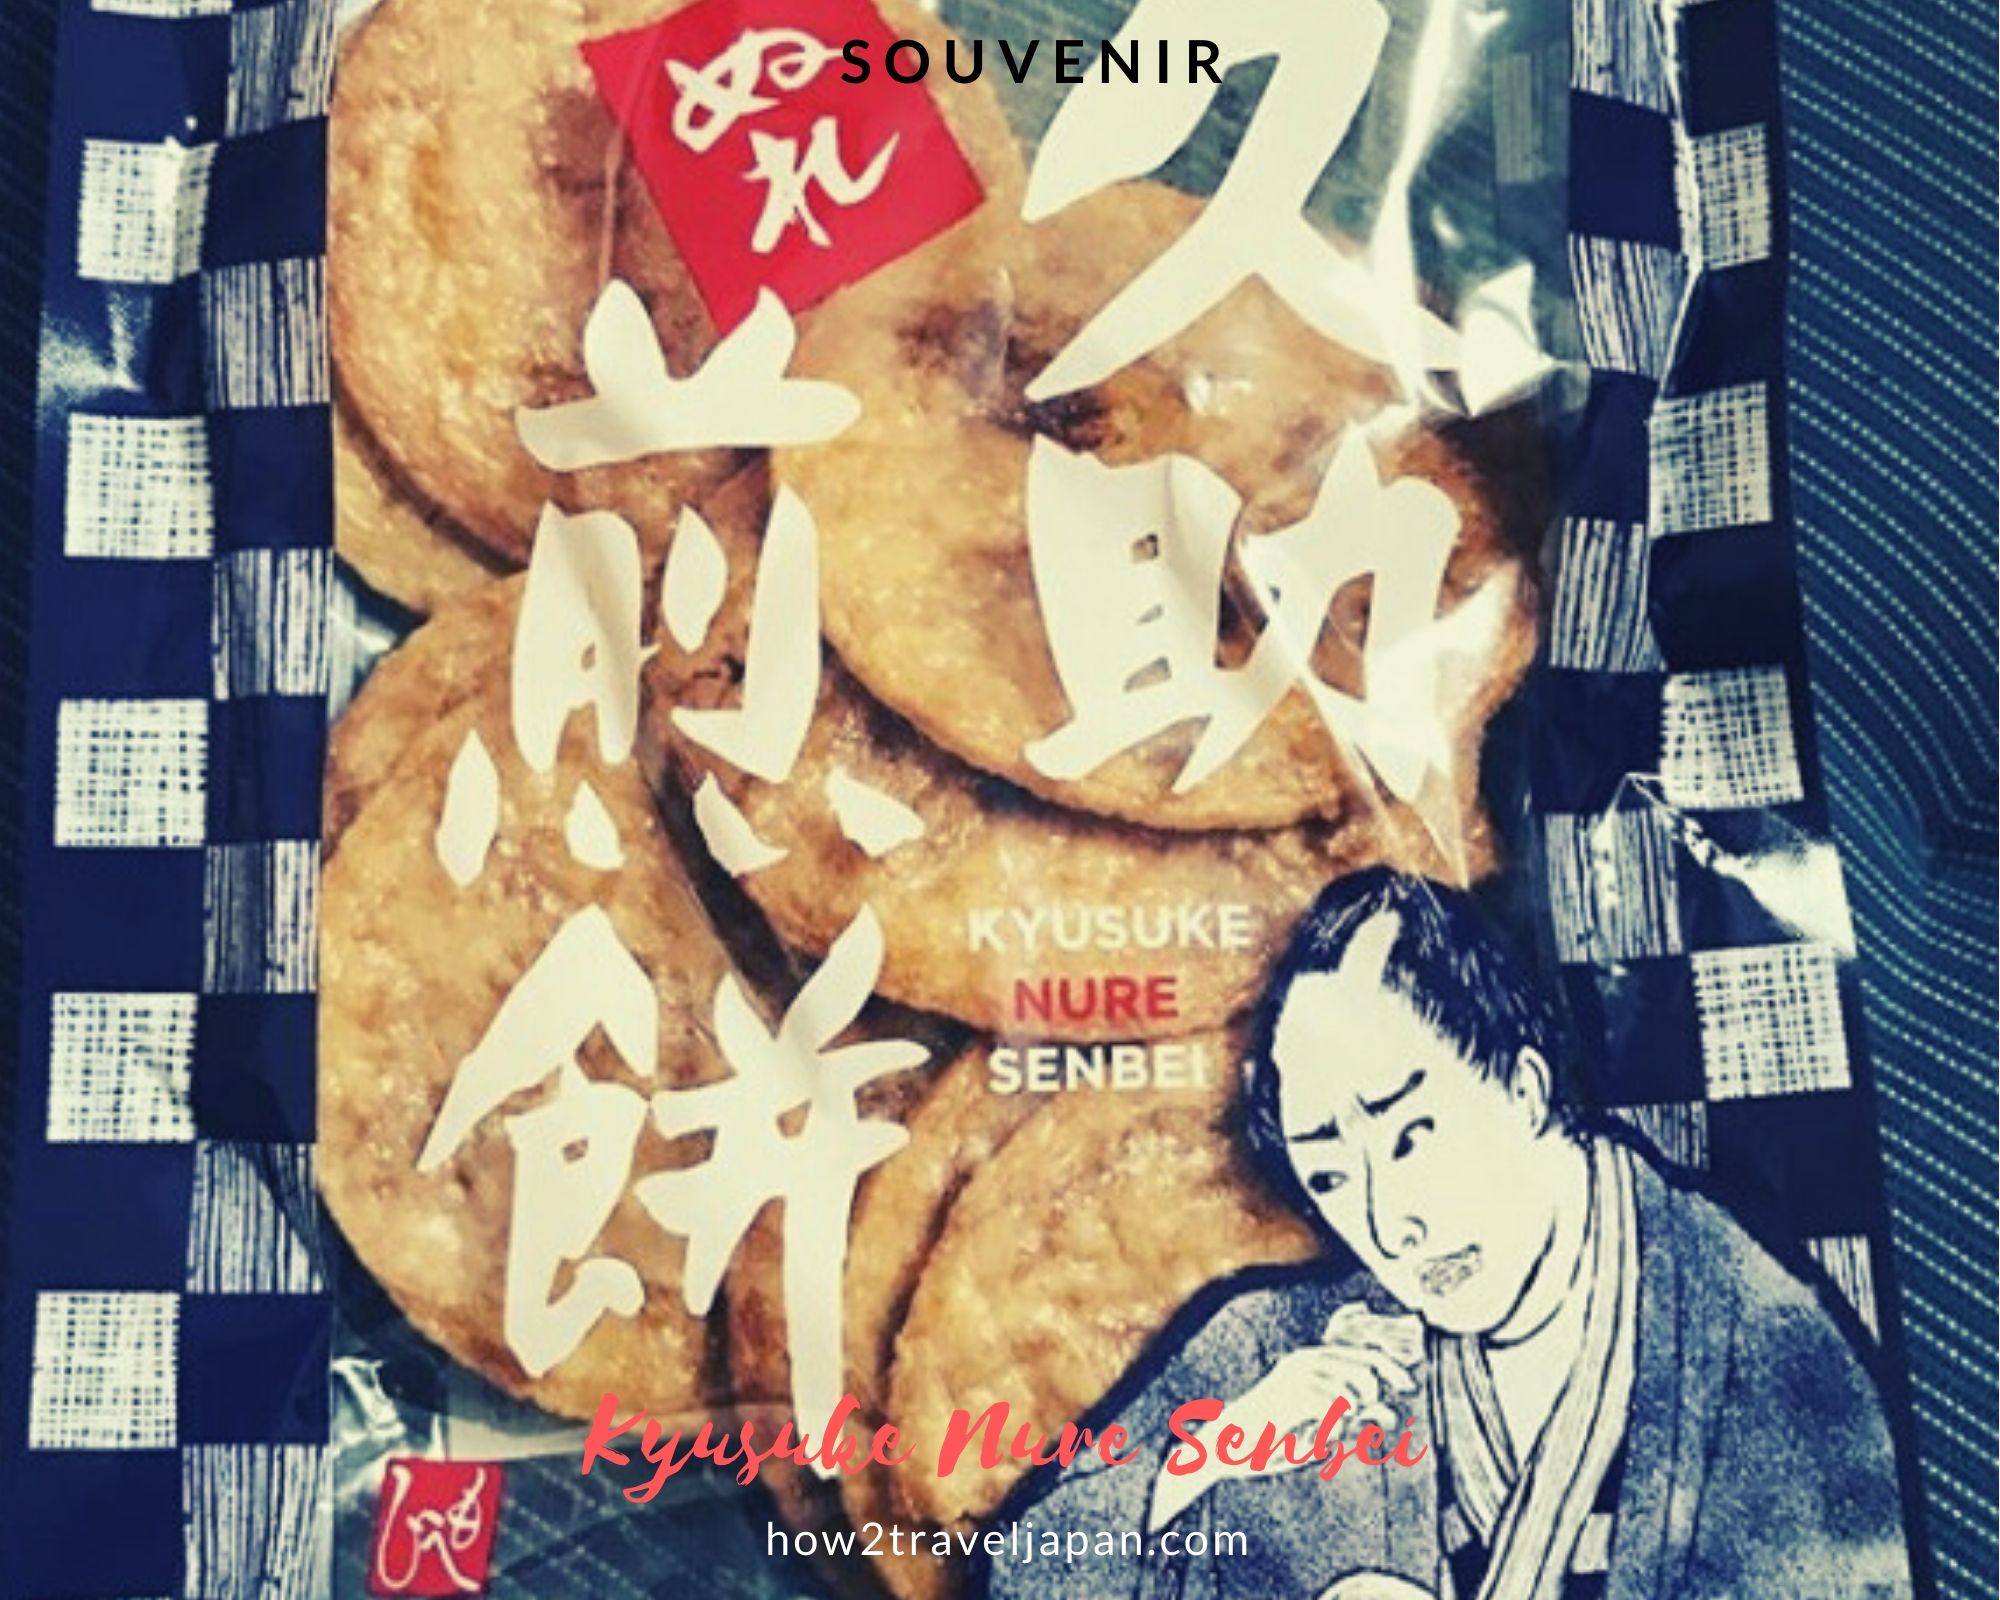 You are currently viewing “Kyusuke” is a secret word for rice cracker sellers